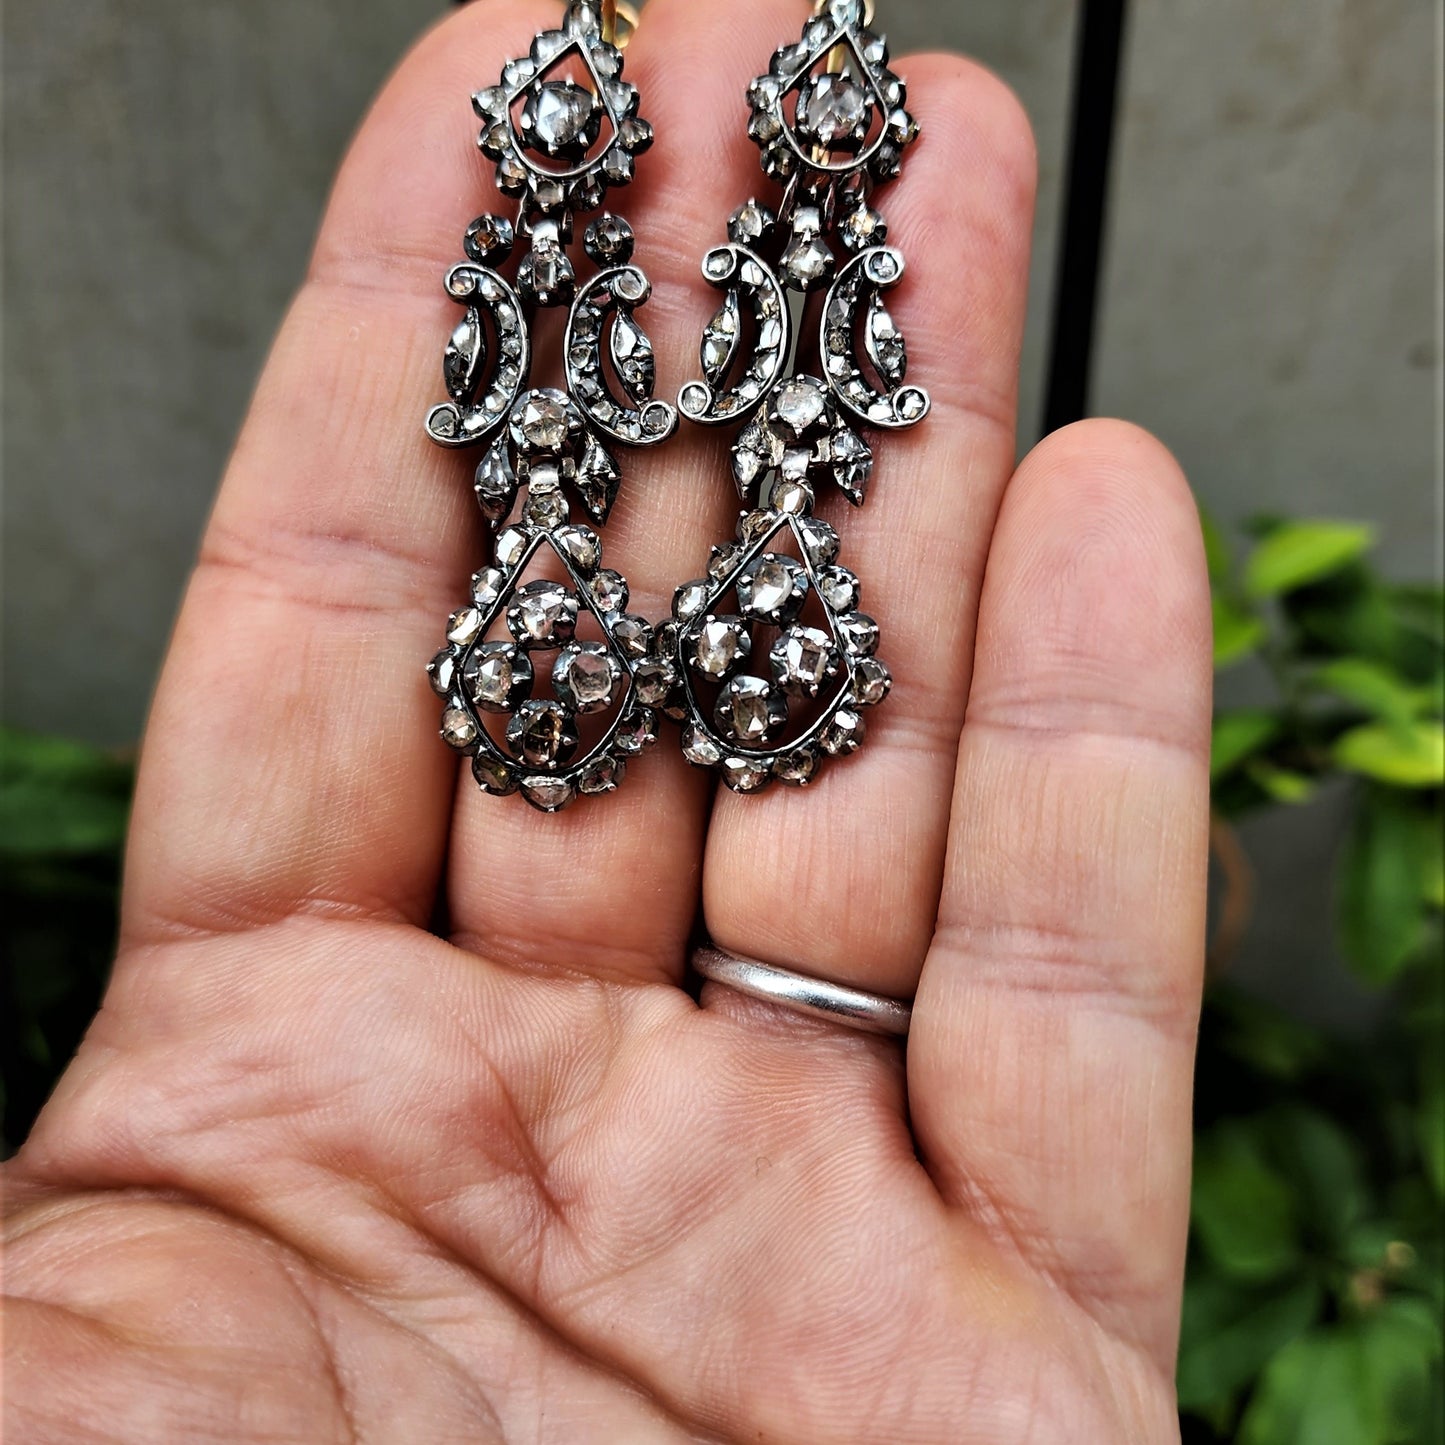 Antique Silver Diamond Iberian Earrings front view, held in hand